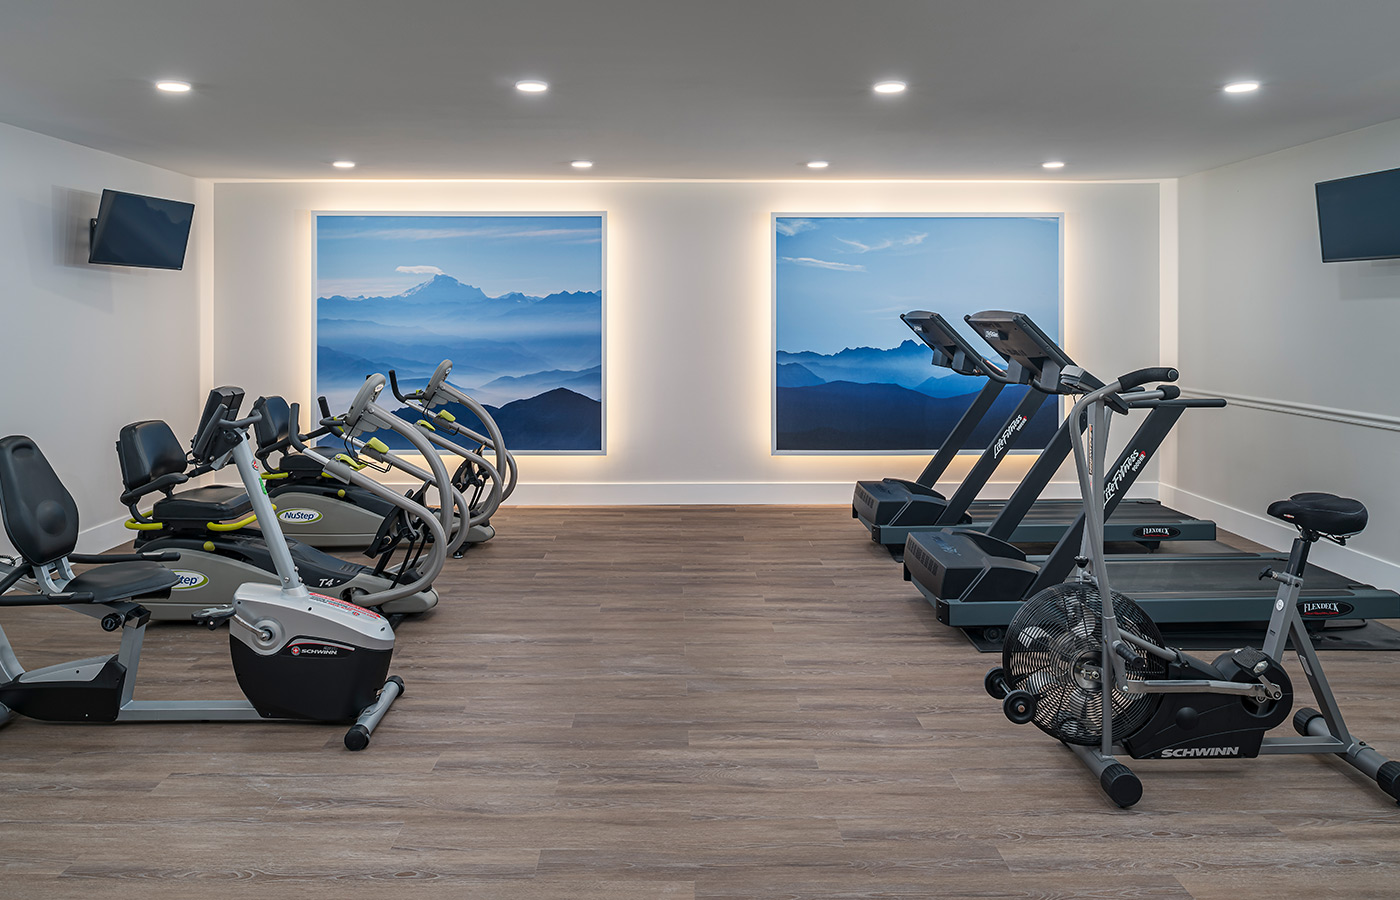 A fitness room with exercise equipment.